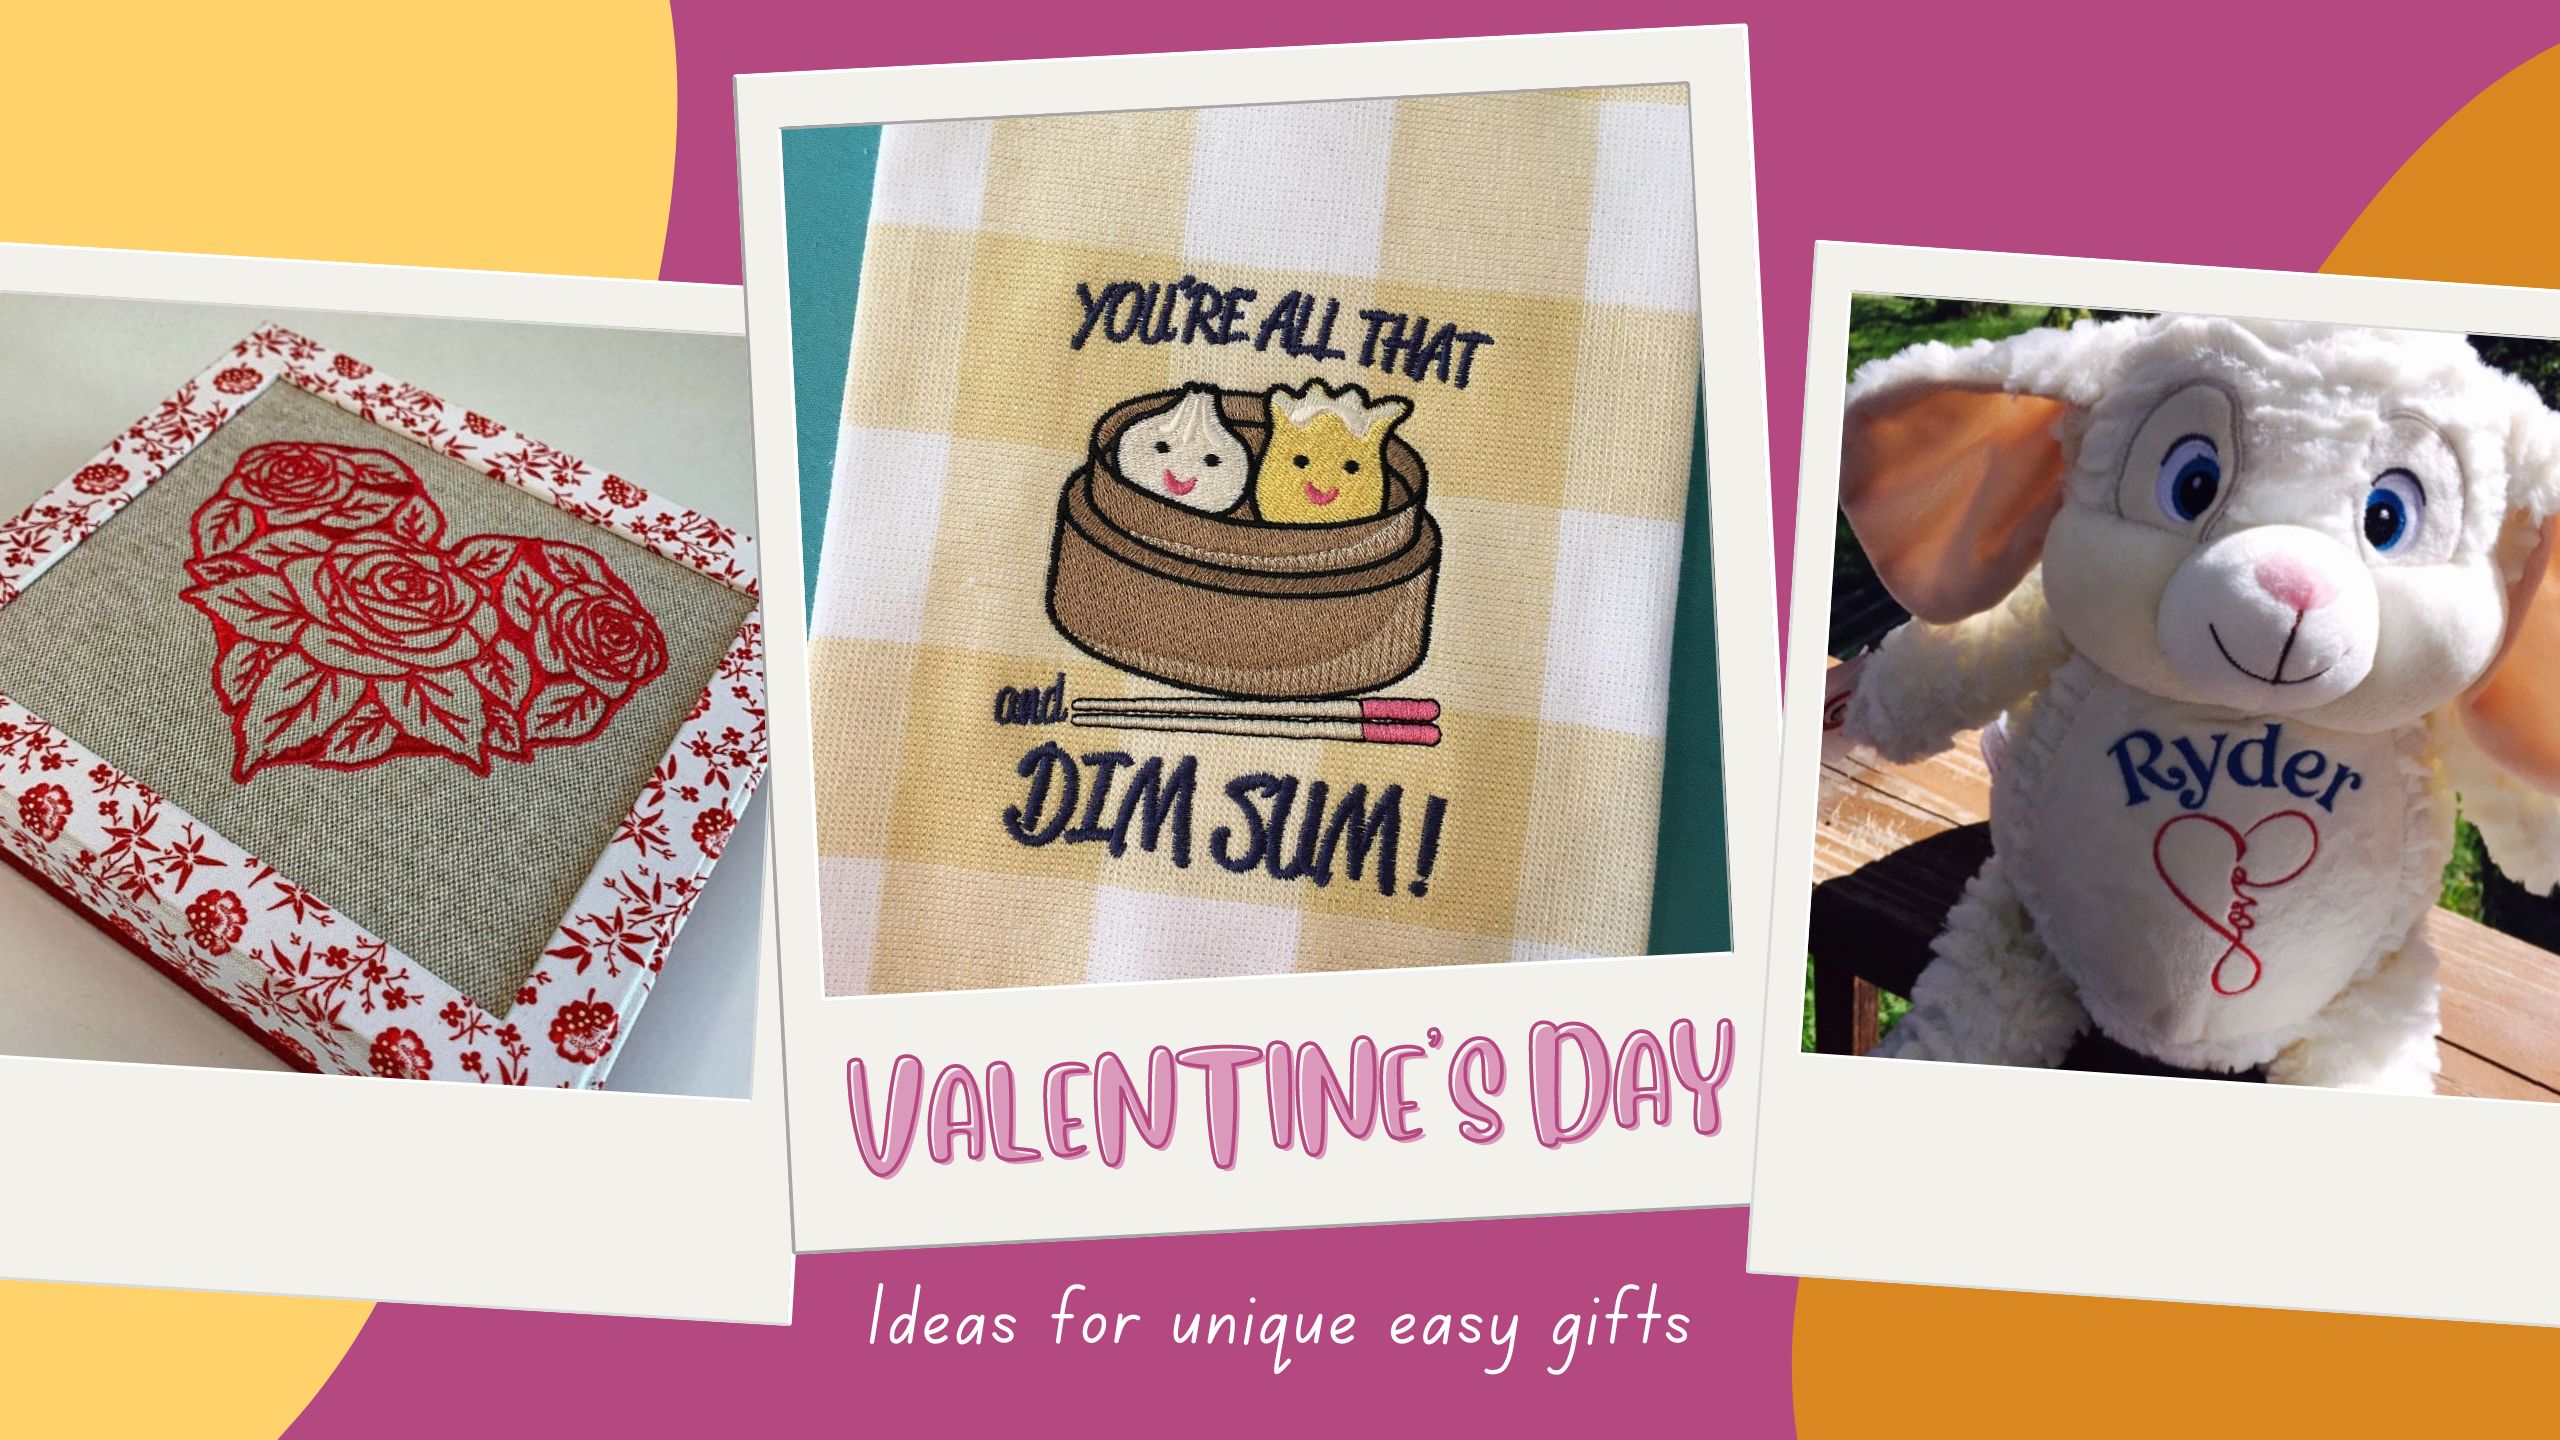 Inspiration and Ideas for Valentine's Day Gifts